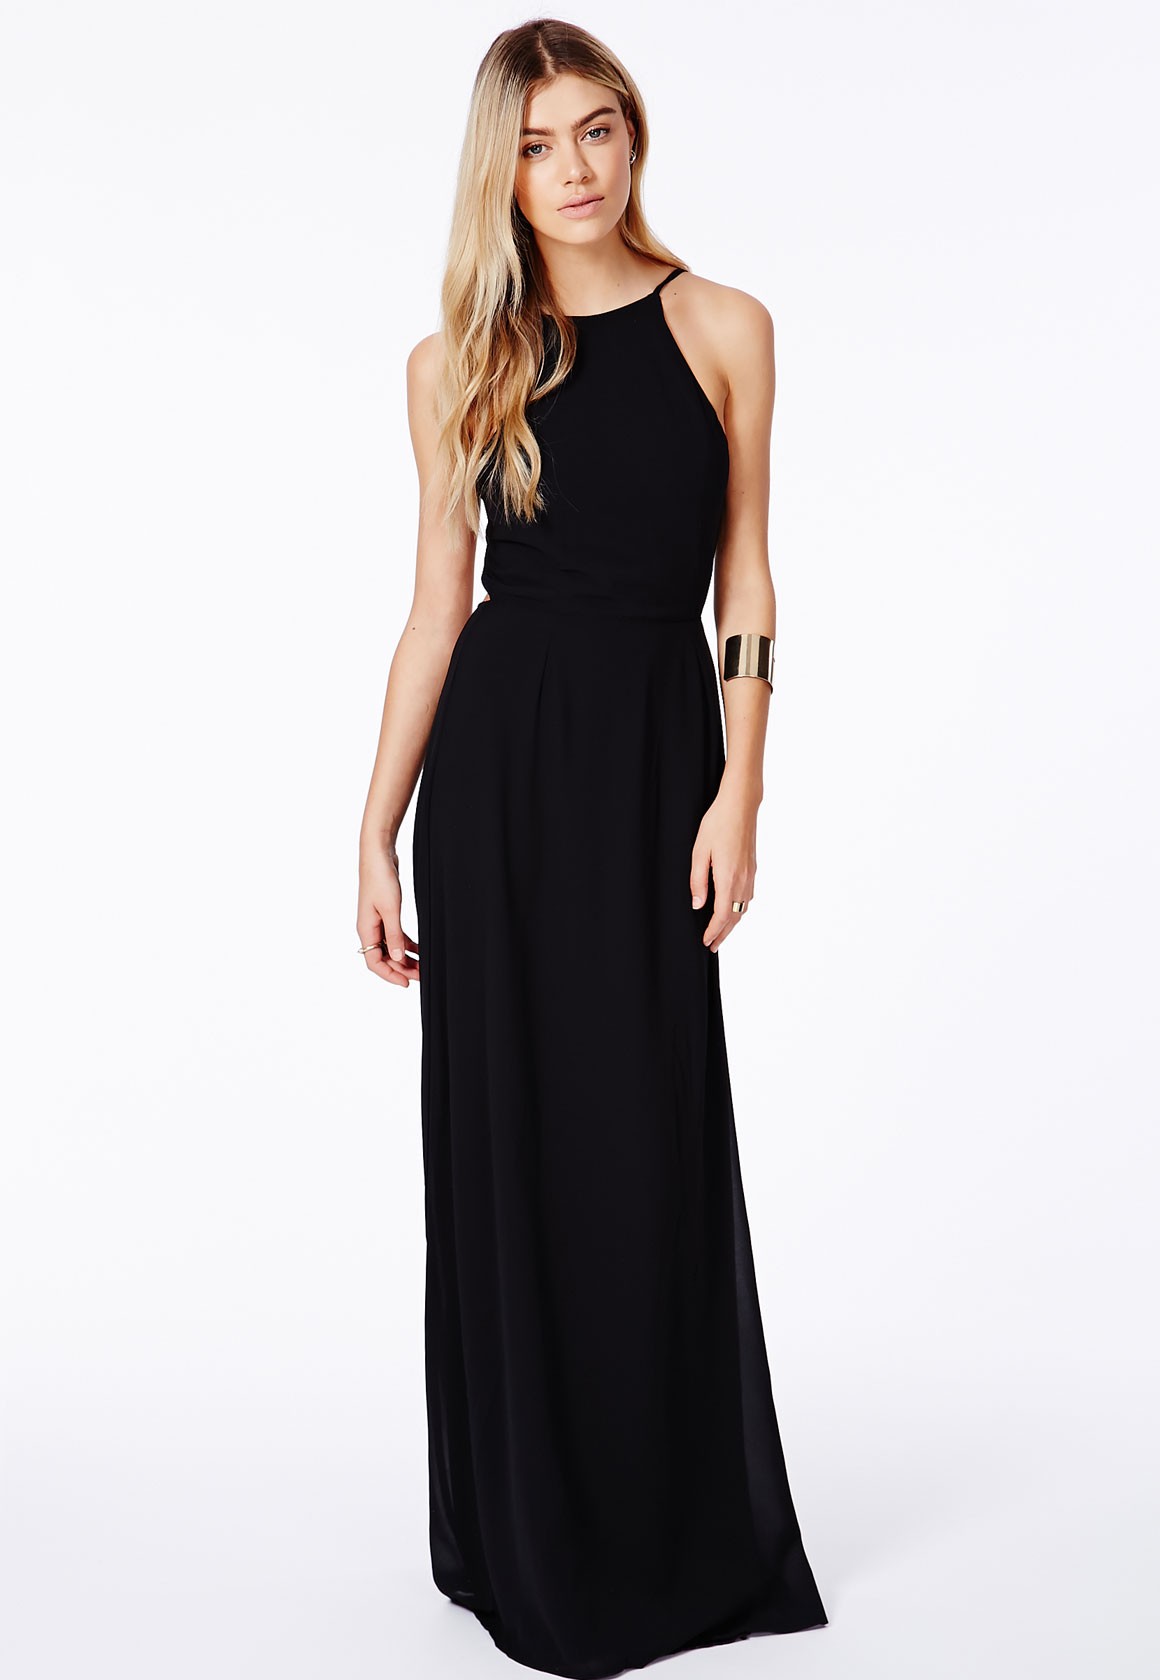 How To Pick The Perfect Black Maxi Dress